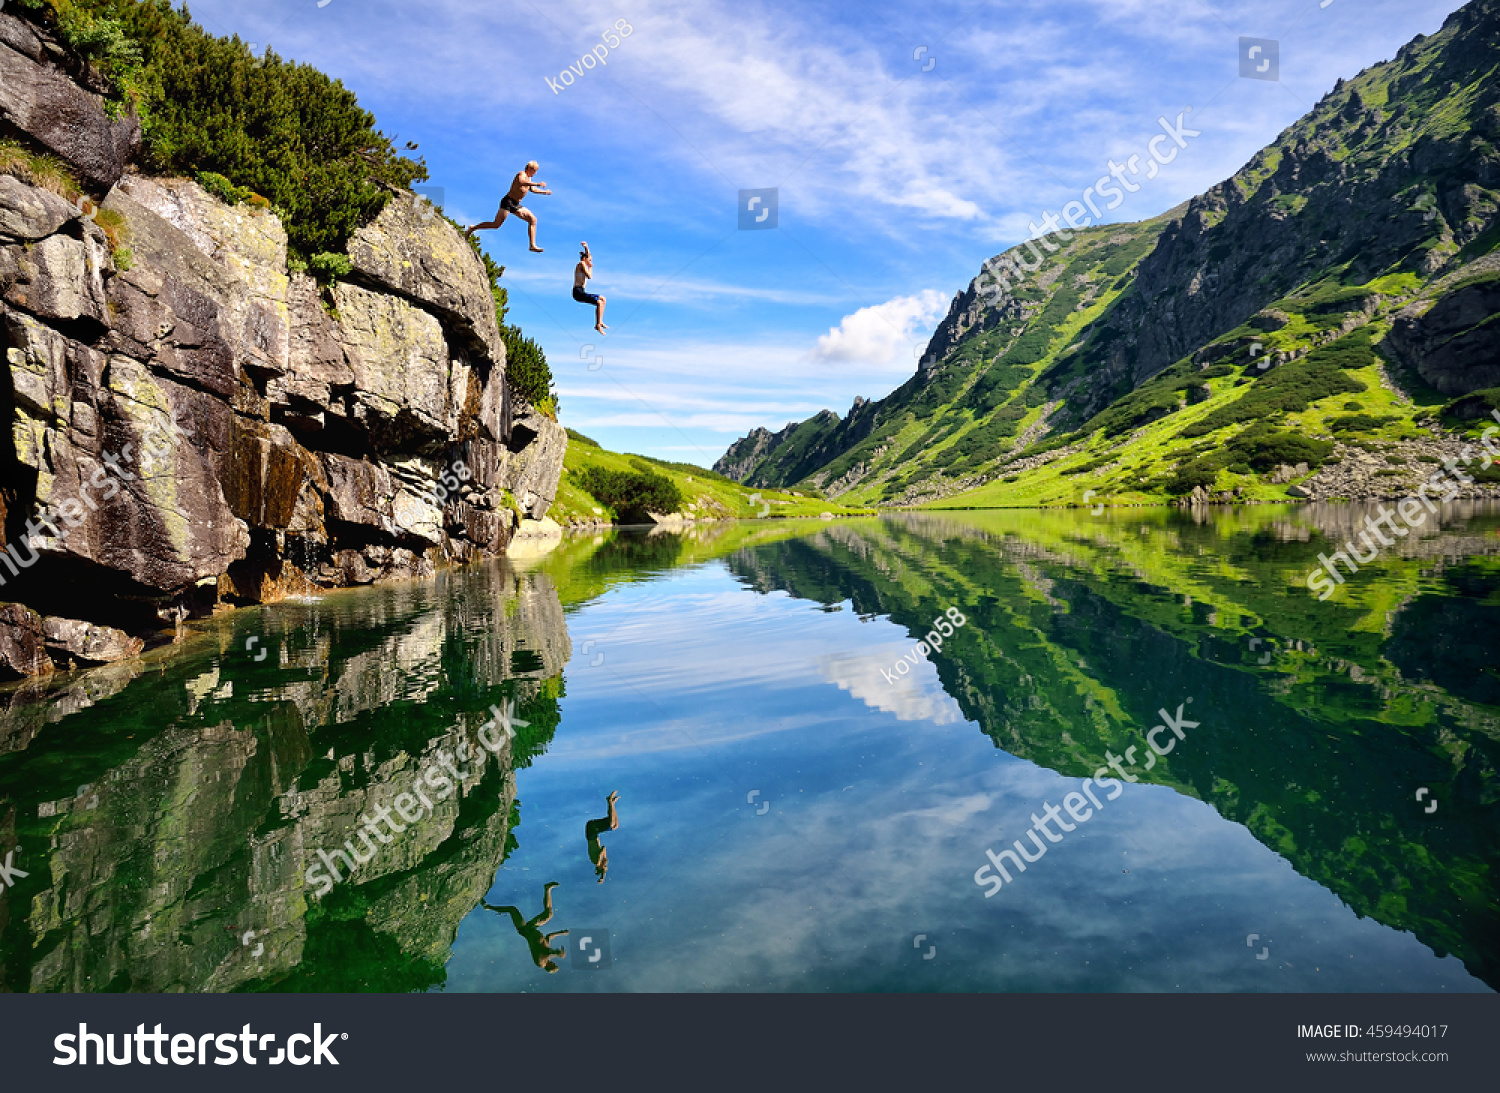 Young couple jump together into lake in mountains with beautiful blue water and reflexion.  #459494017